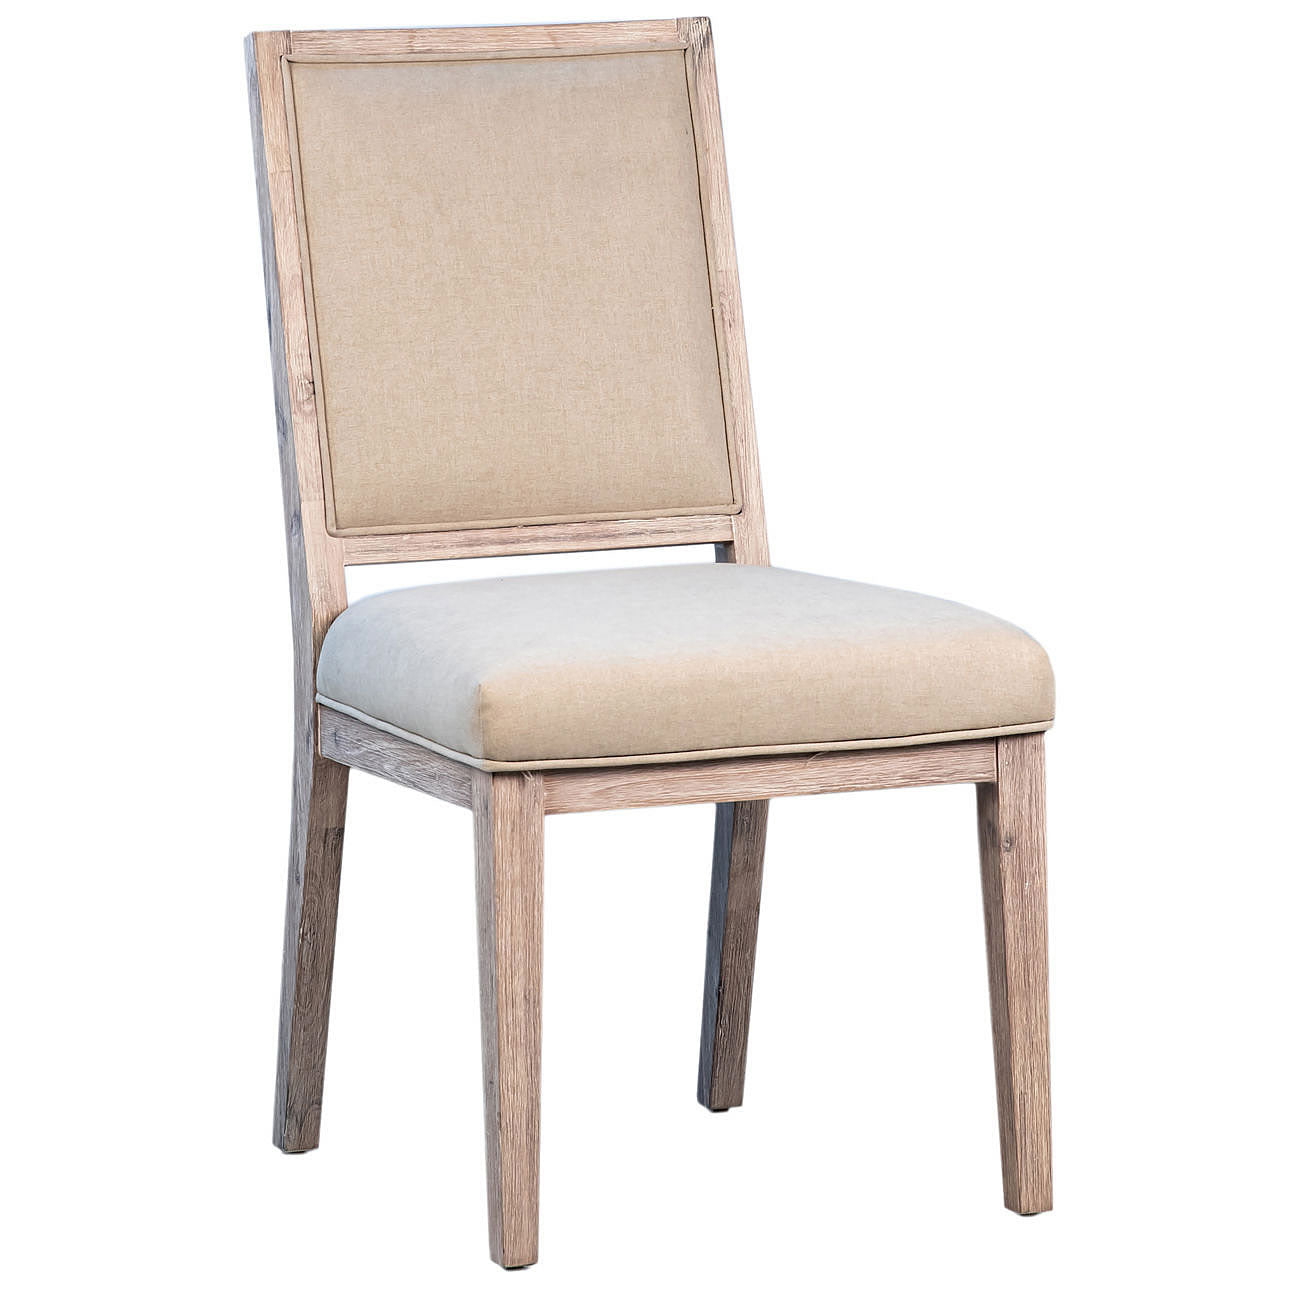 PAIR of Rafael Dining Chairs In Accacia Wood & Sand Color Cotton Blend Hollywood